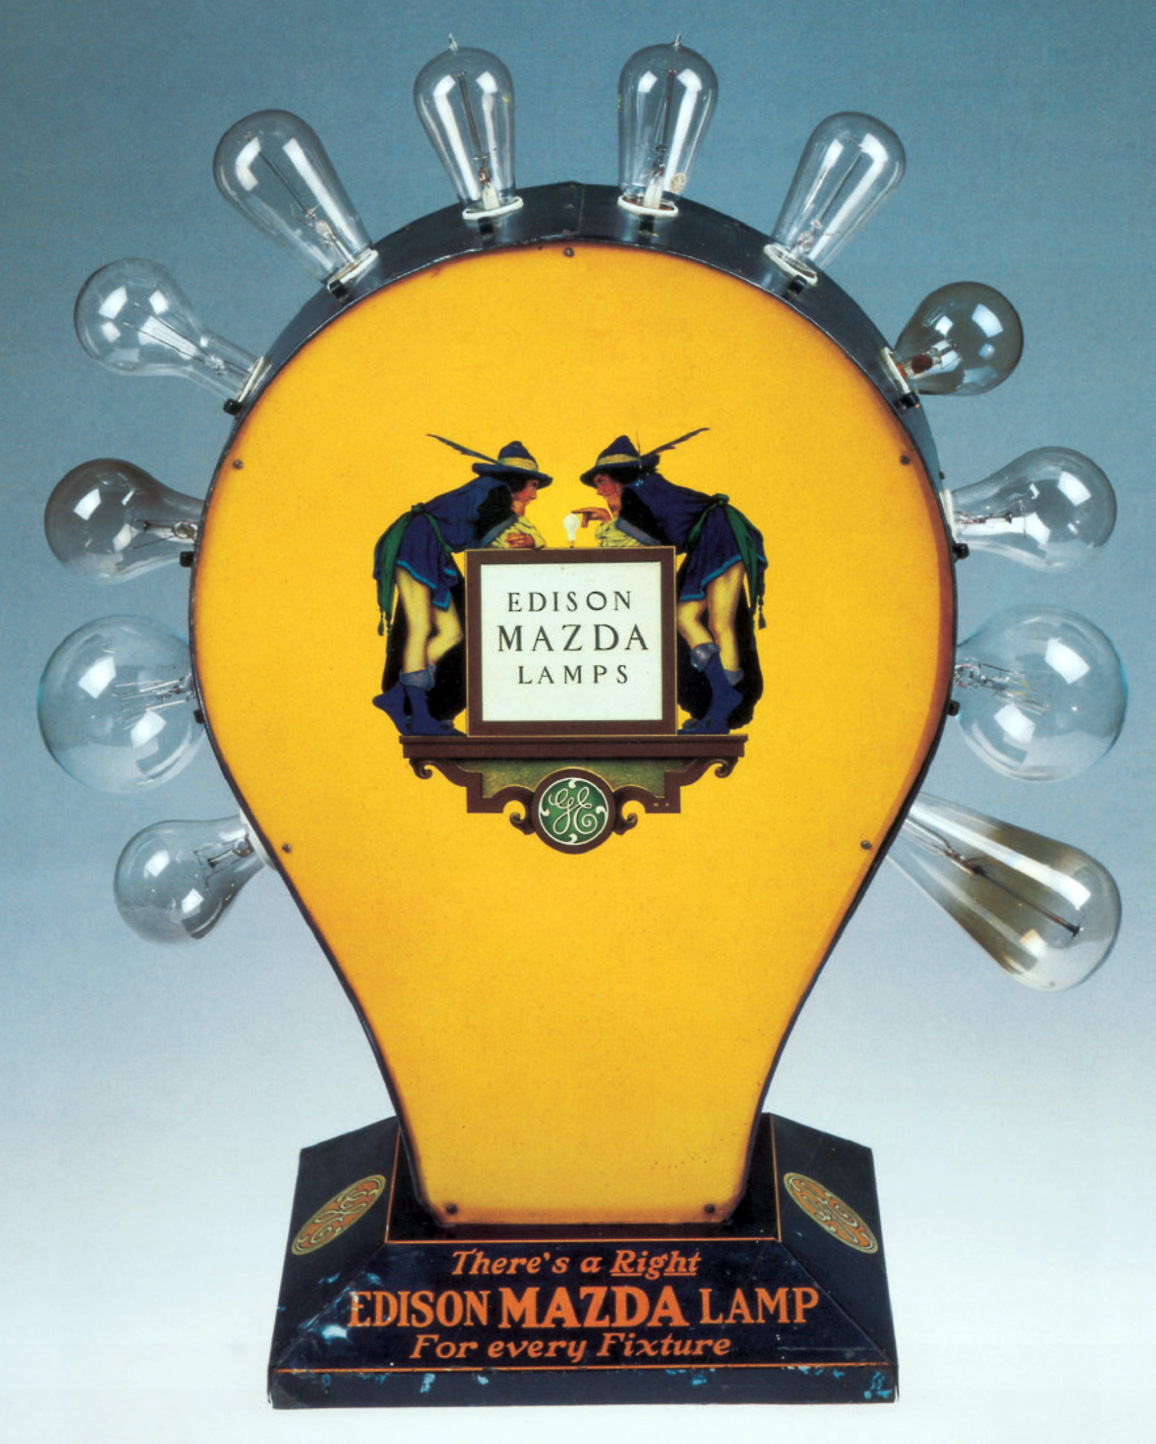 A display designed by Maxfield Parrish for General Electric, circa nineteen twenty five. Displays such as this were used in hardware stores for customers to test their bulbs before purchasing.